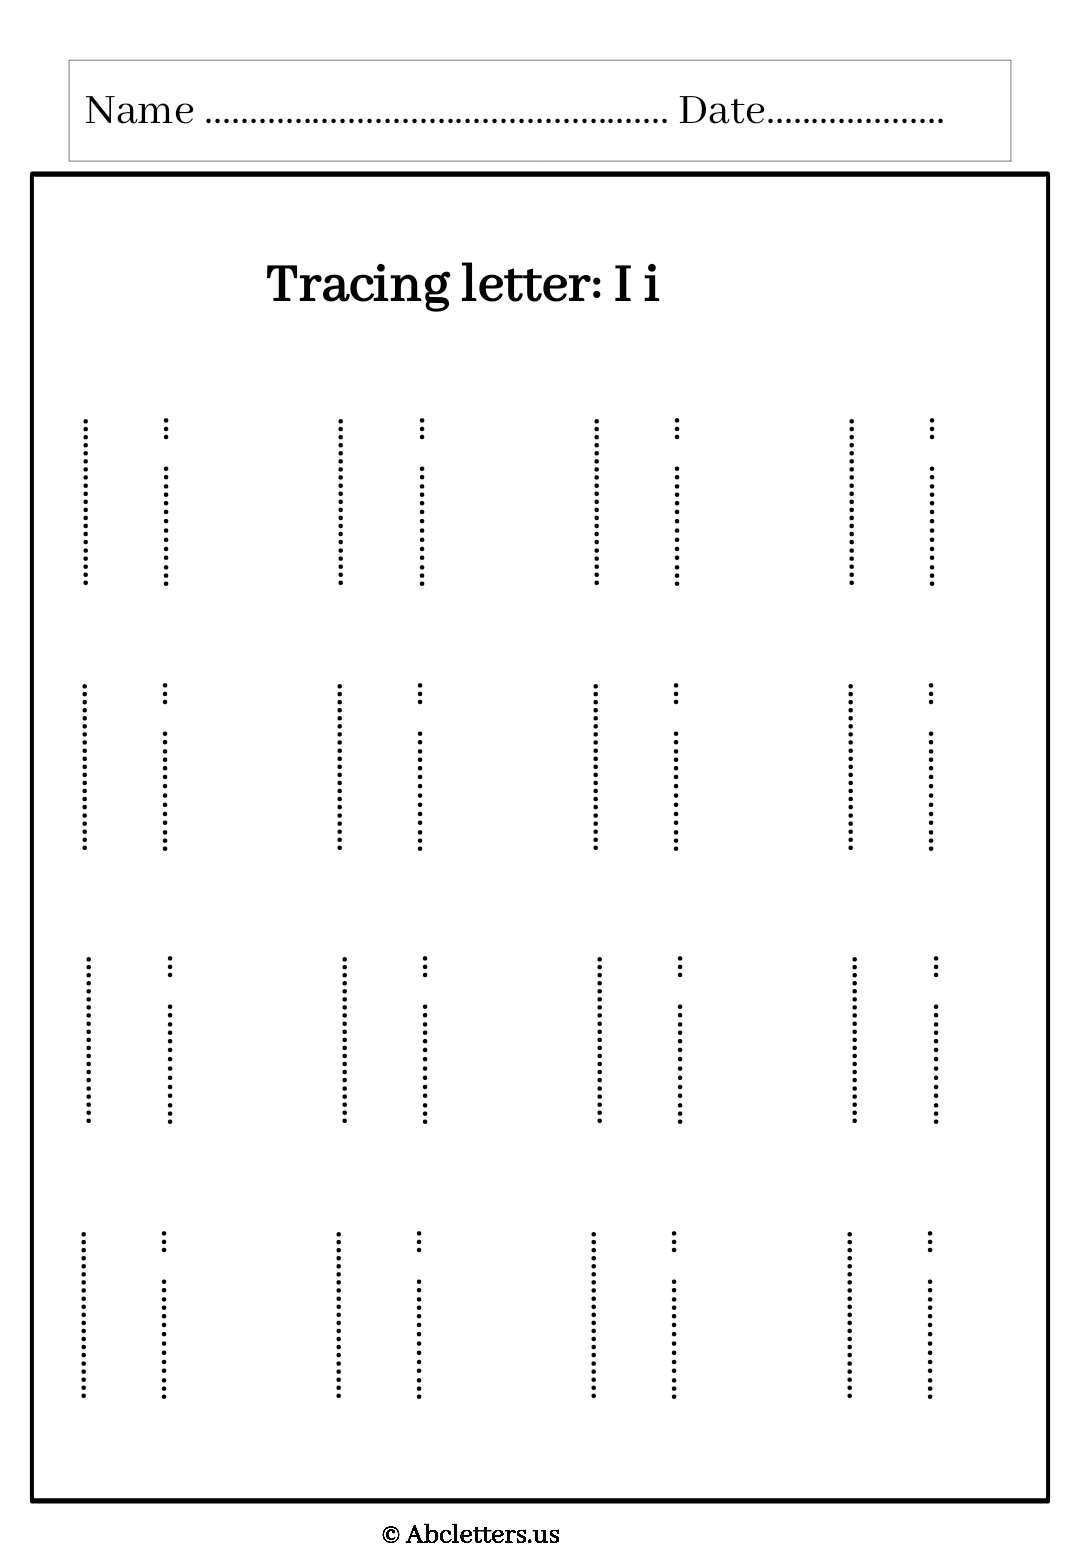 Tracing letter Ii